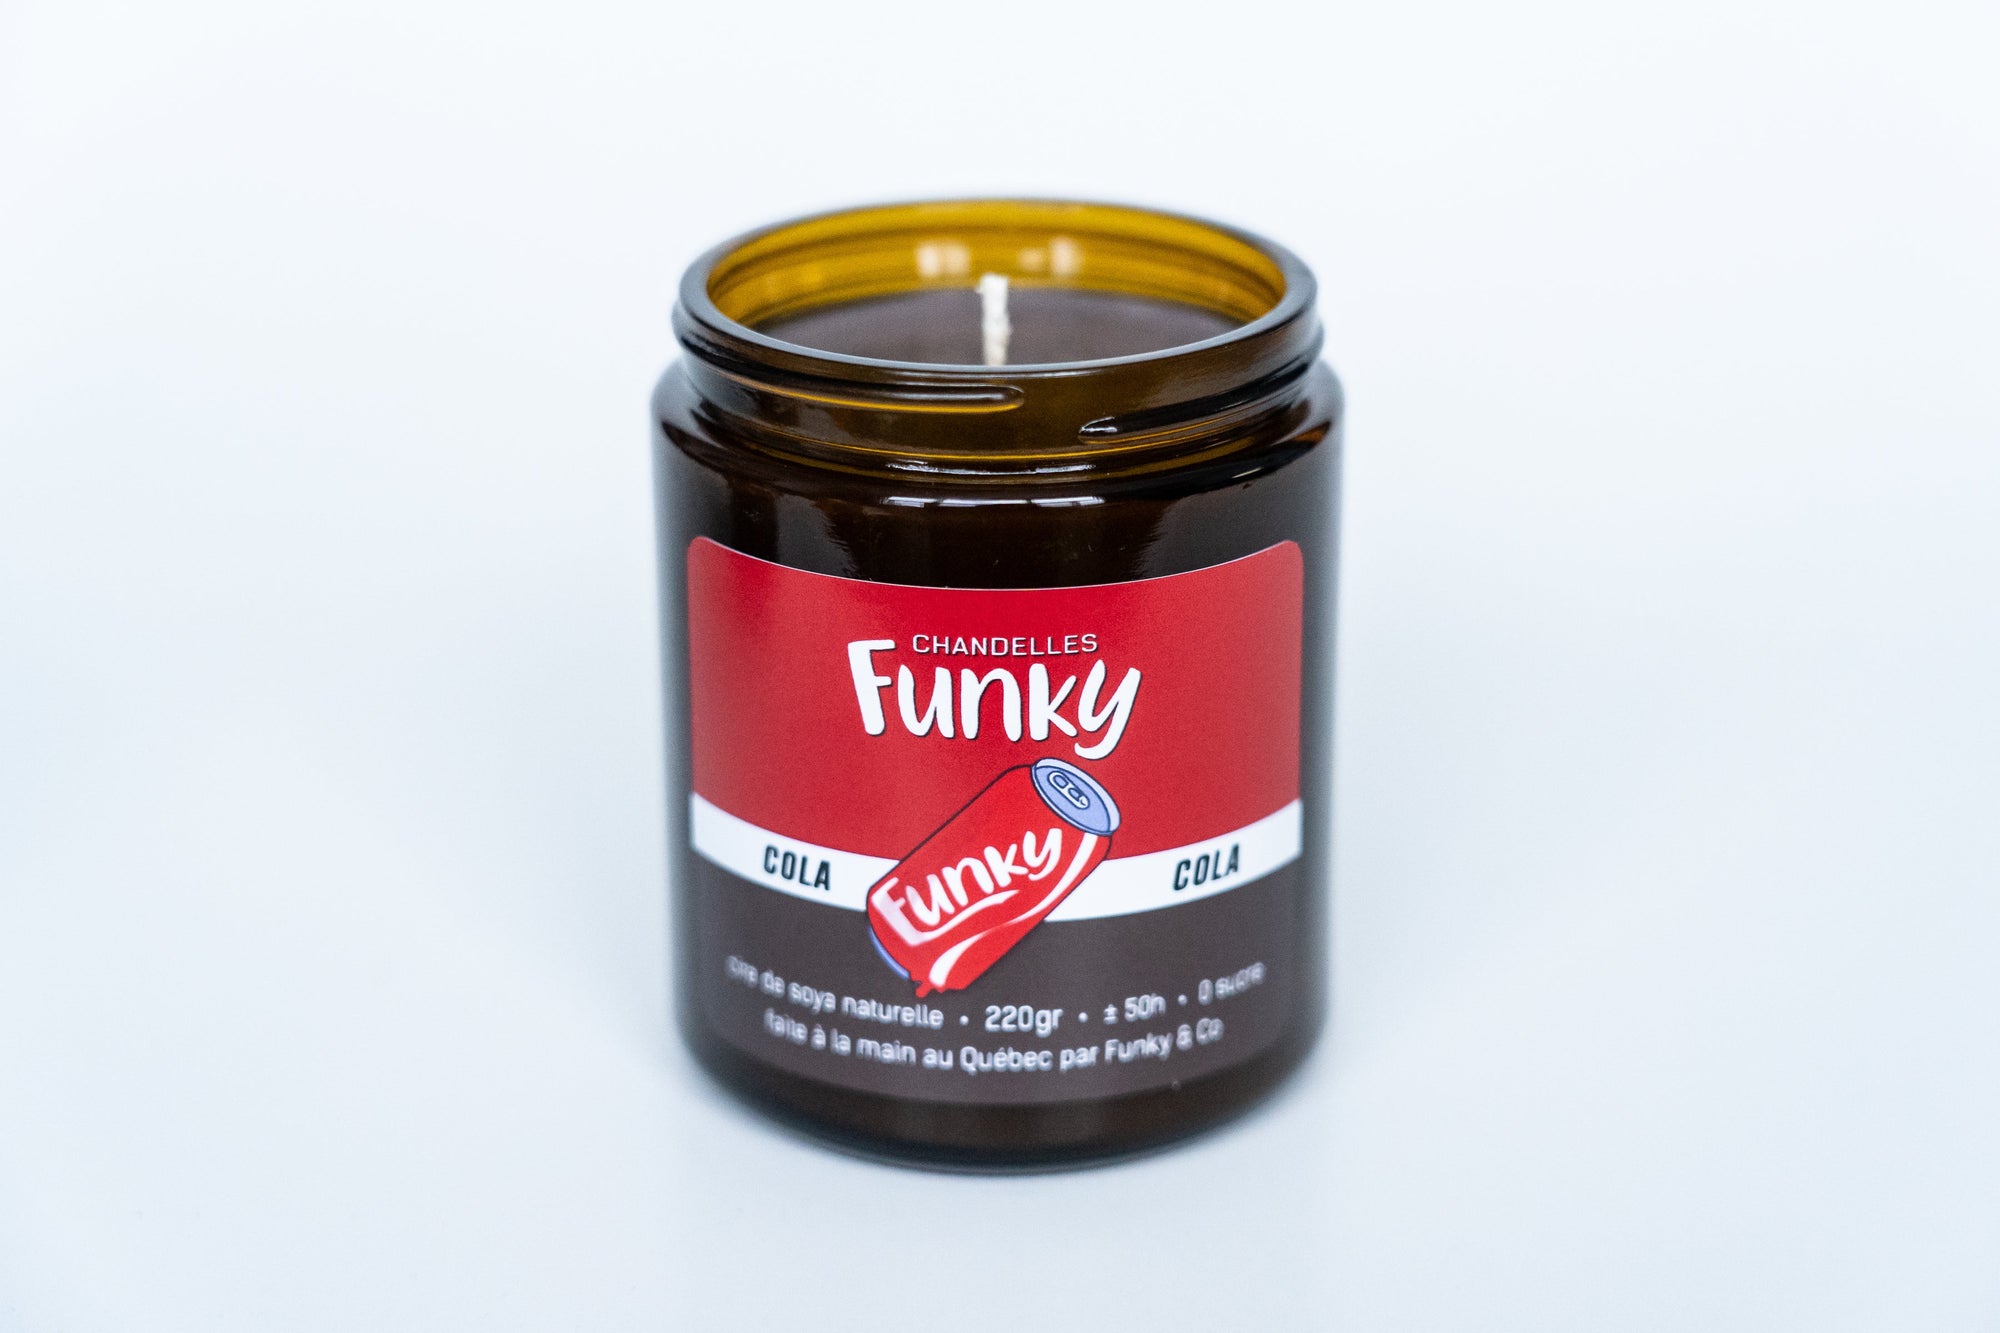 Chandelle Cola - Funky - Funky & Co.